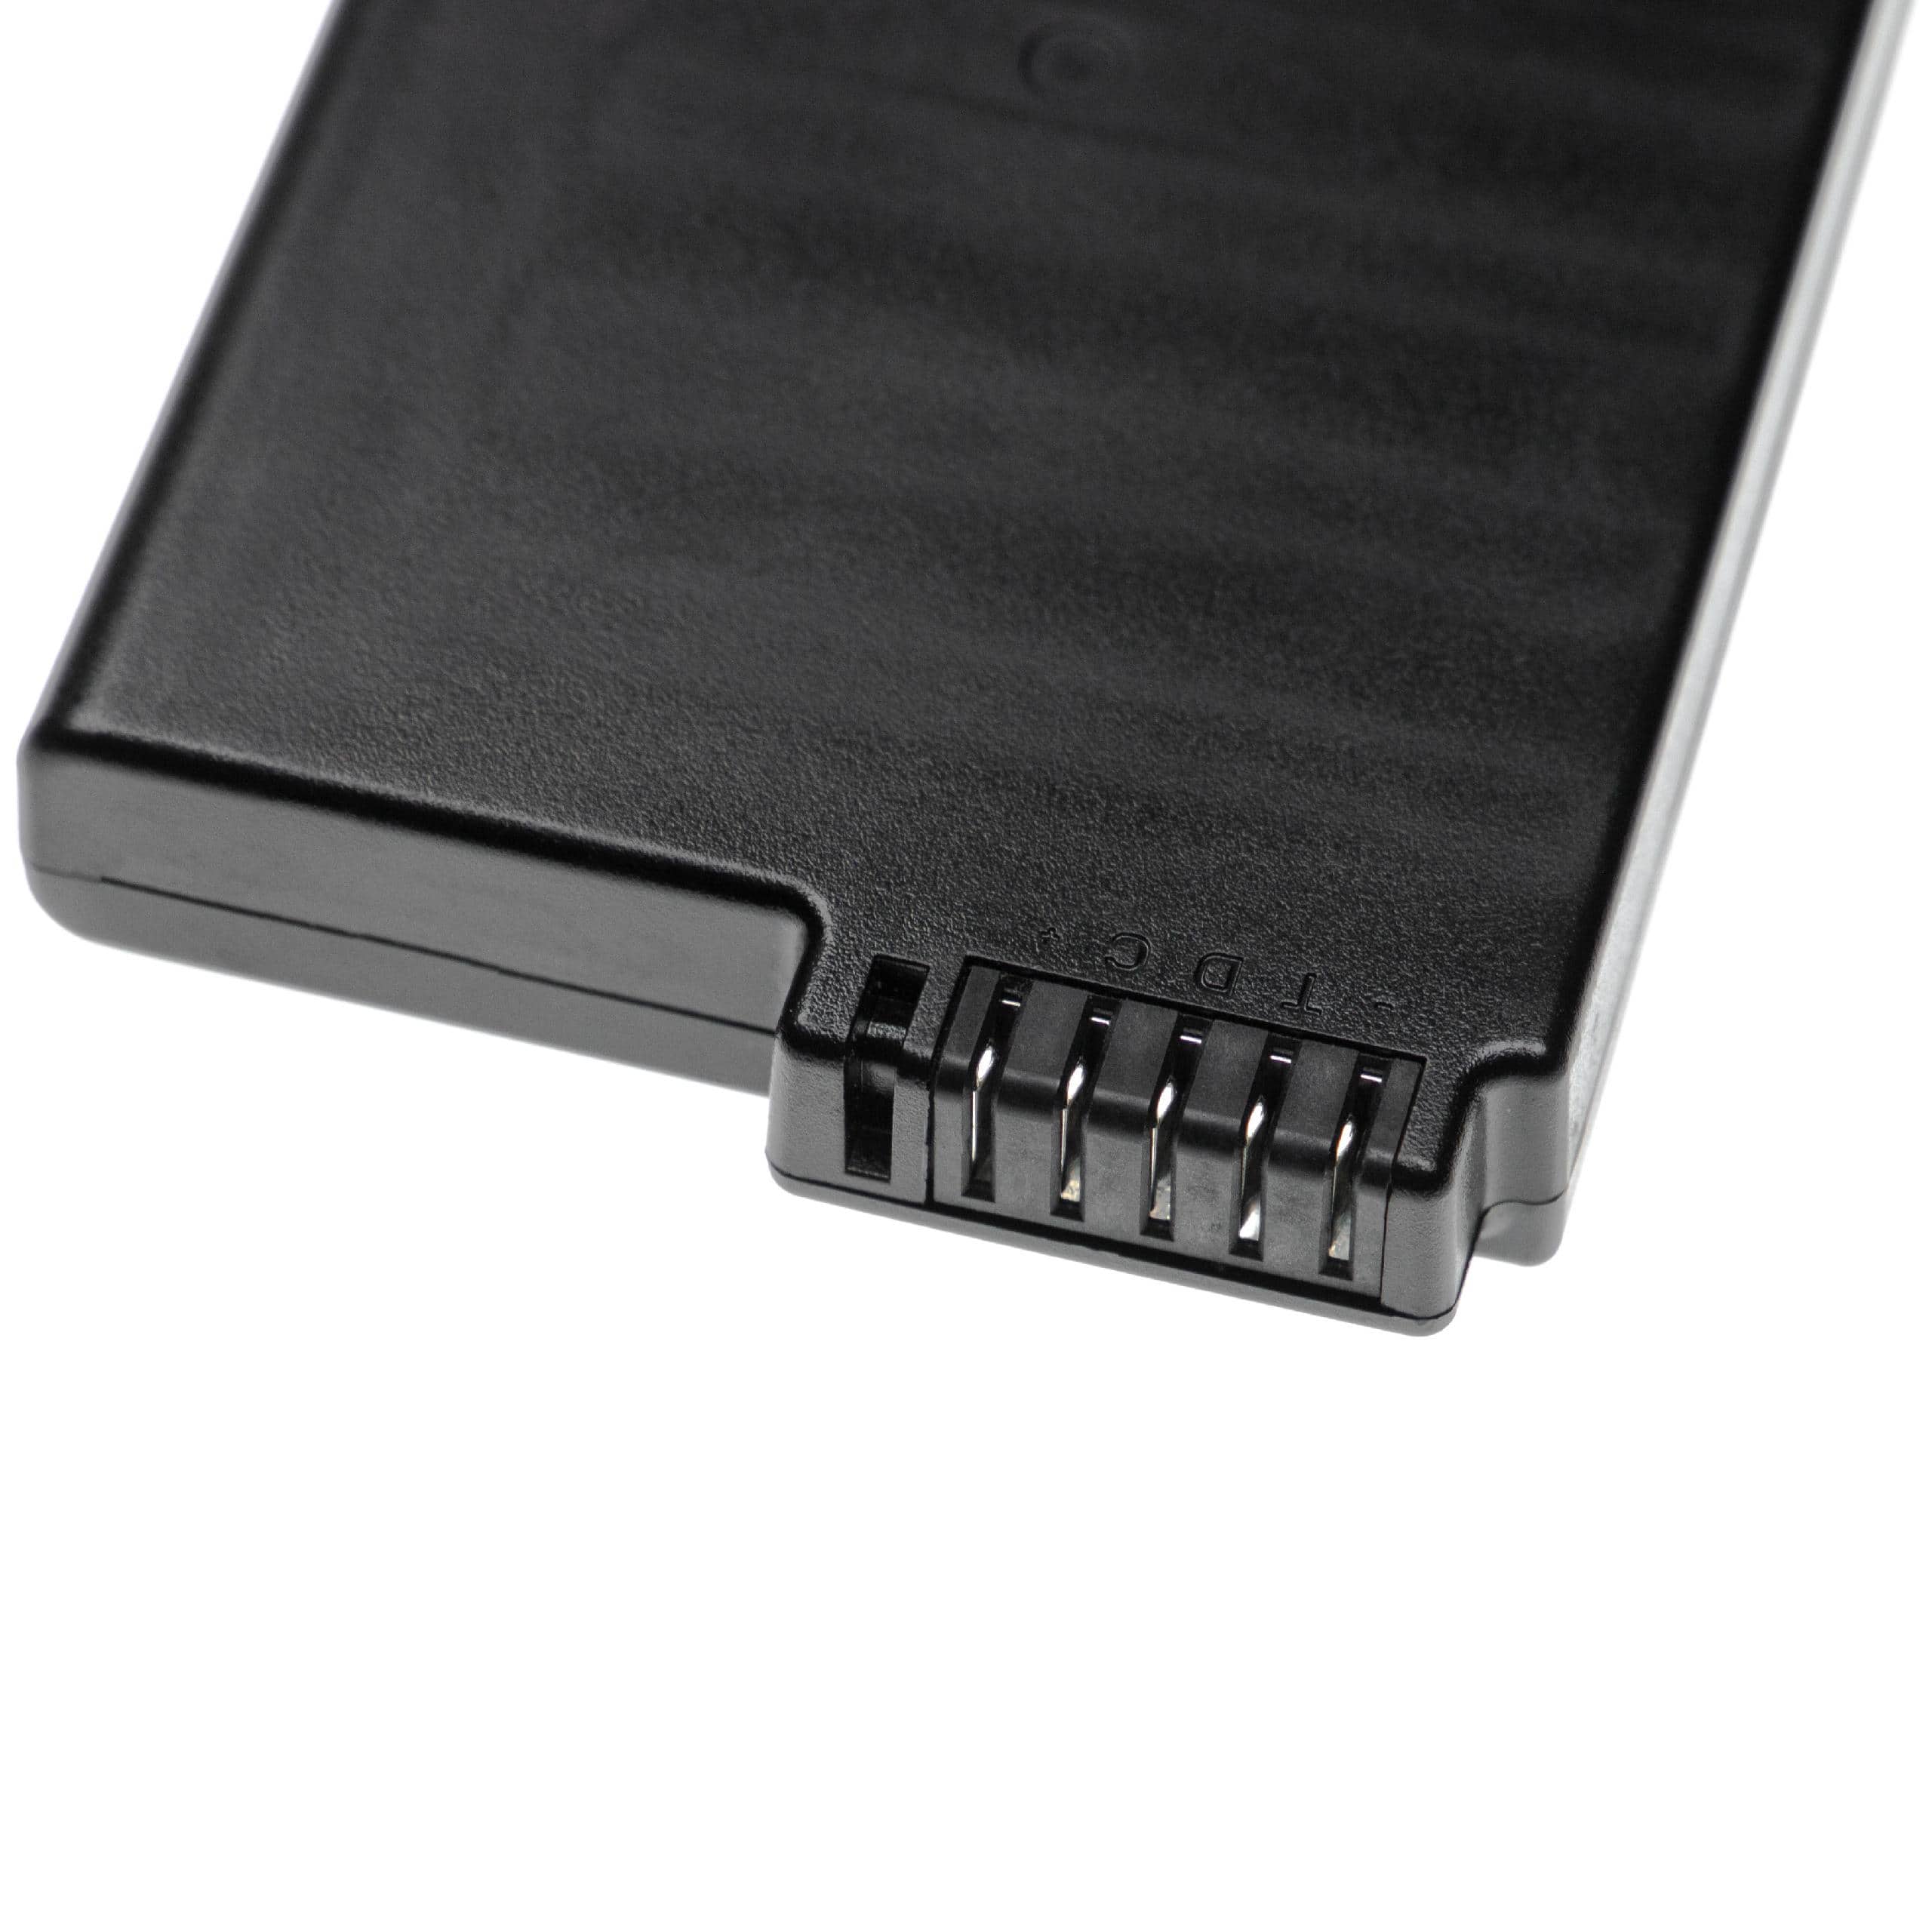 Notebook Battery Replacement for Getac / Hasee 33-01PI, 338911120104, BP-LP2900 - 8700mAh 10.8V Li-Ion, black